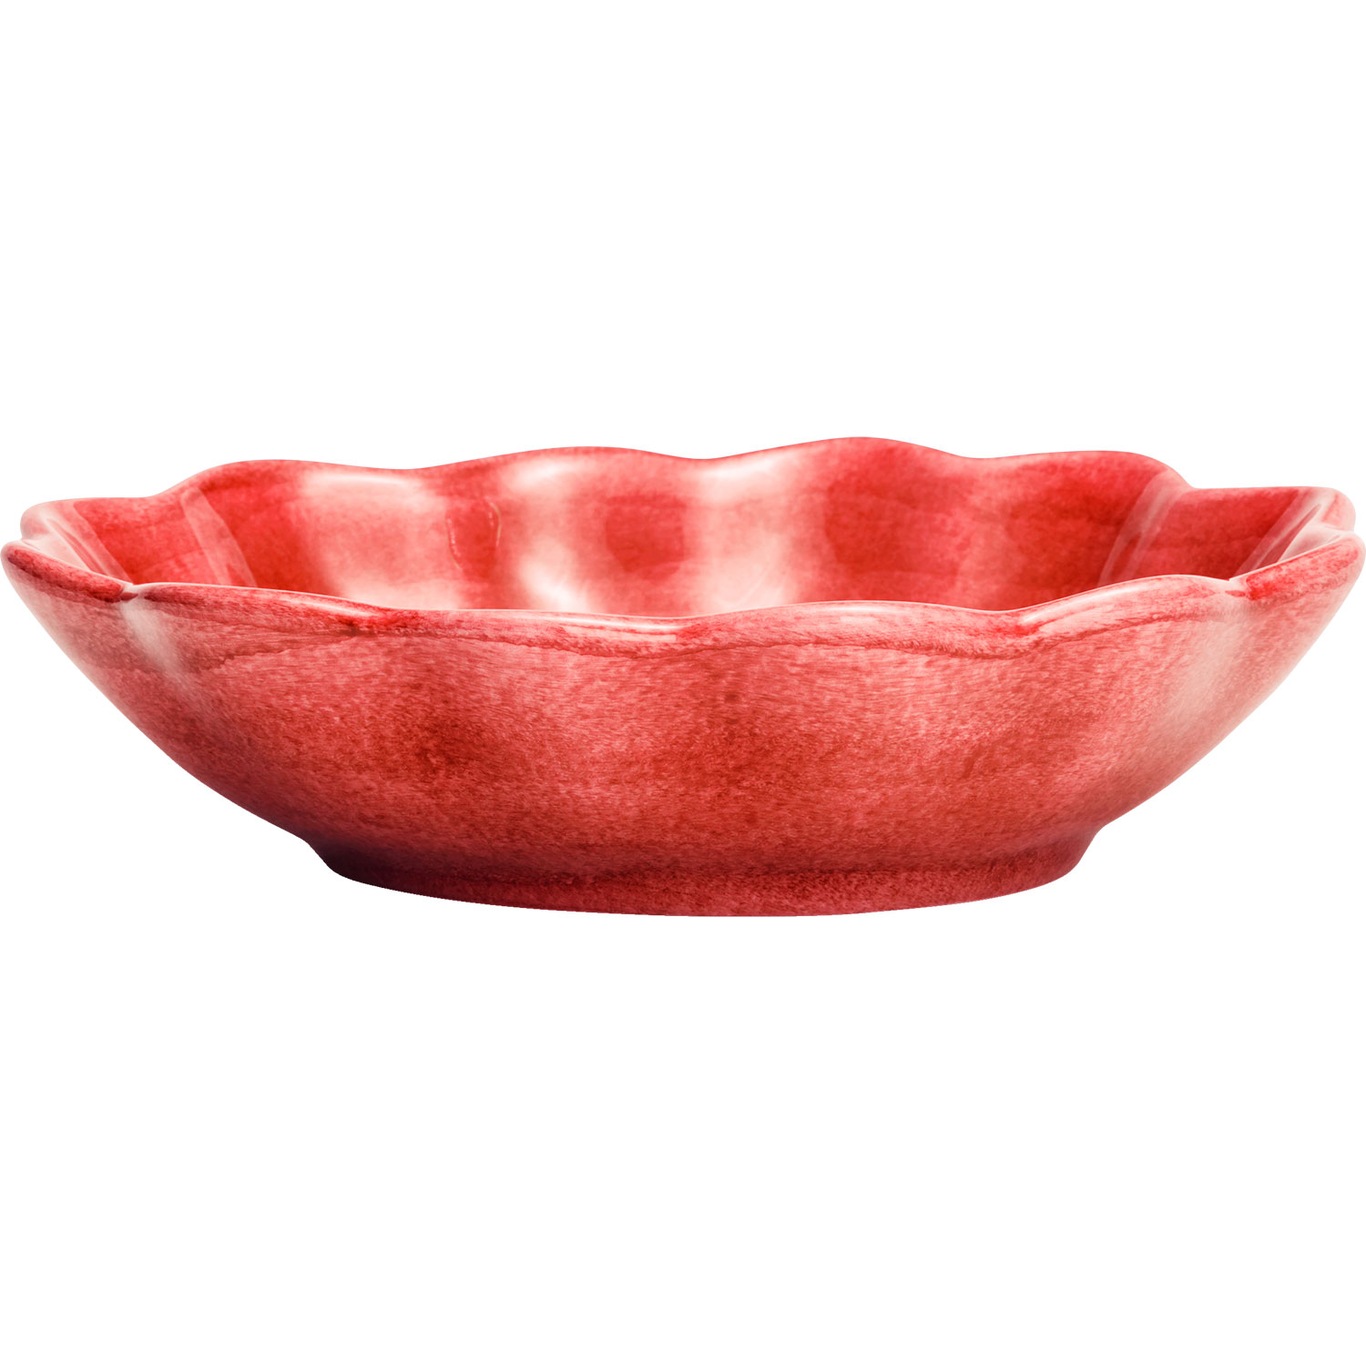 Oyster Bowl Limited Edition 16x18 cm, Red